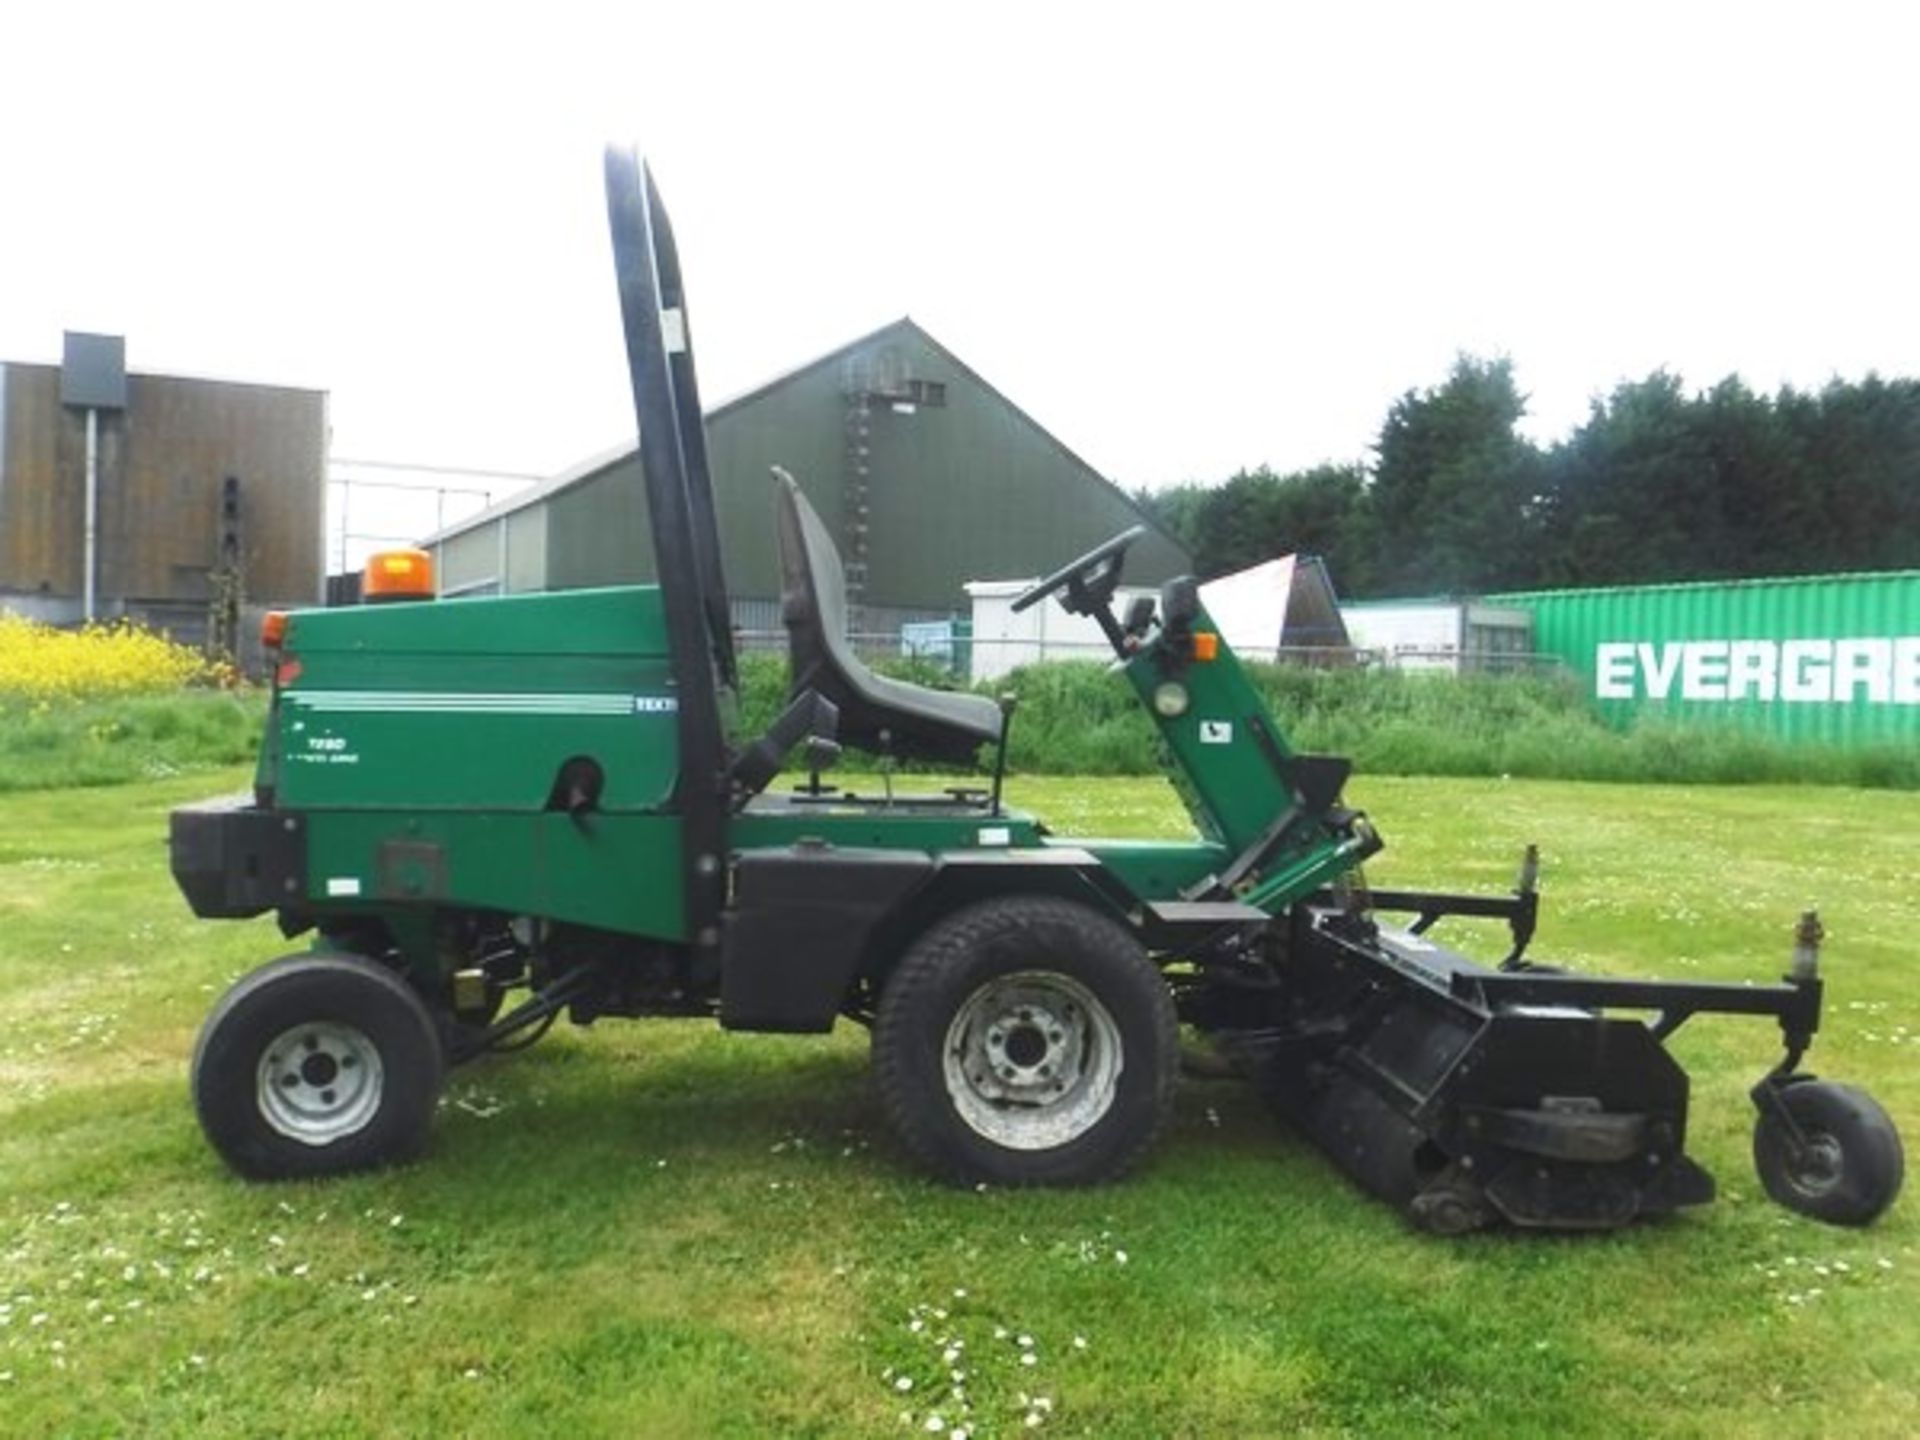 RANSOMES FRONT LINE 7280 ride on mower. Reg - Y106BSX. 4029hrs (not verified) - Image 8 of 13